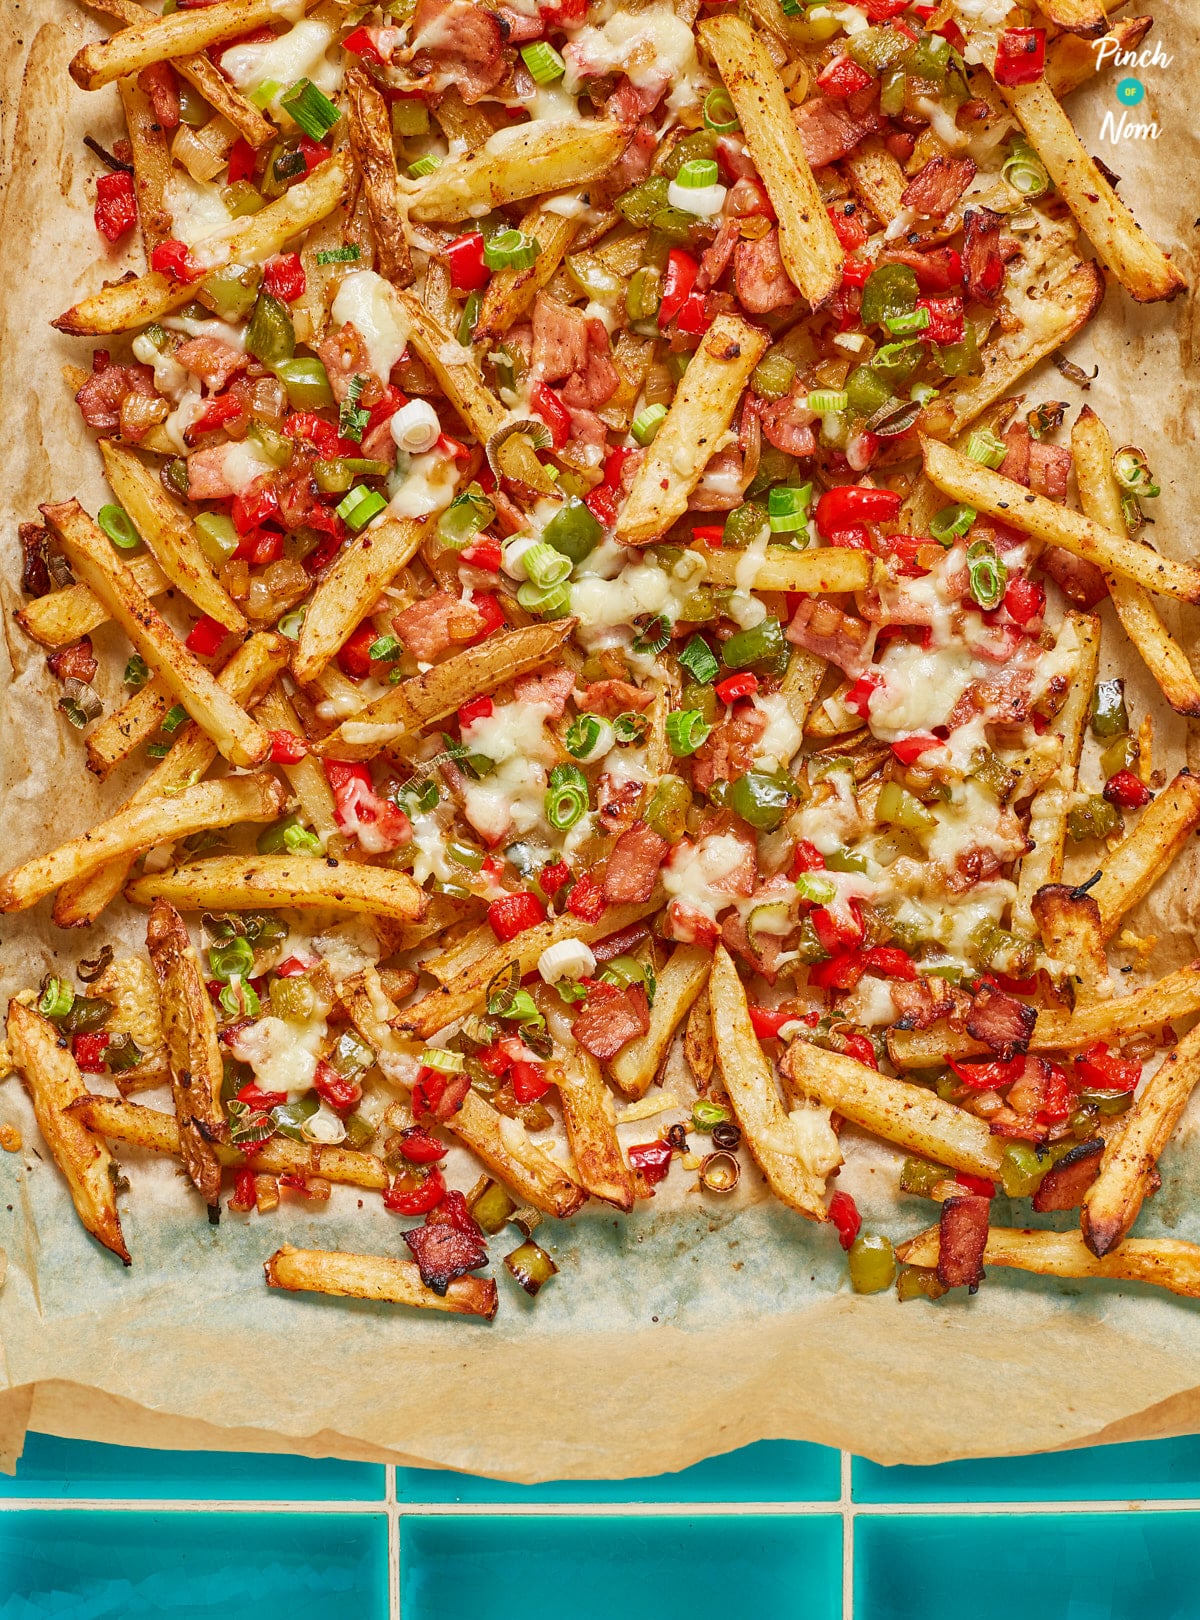 Dirty Fries - Pinch of Nom Slimming Recipes